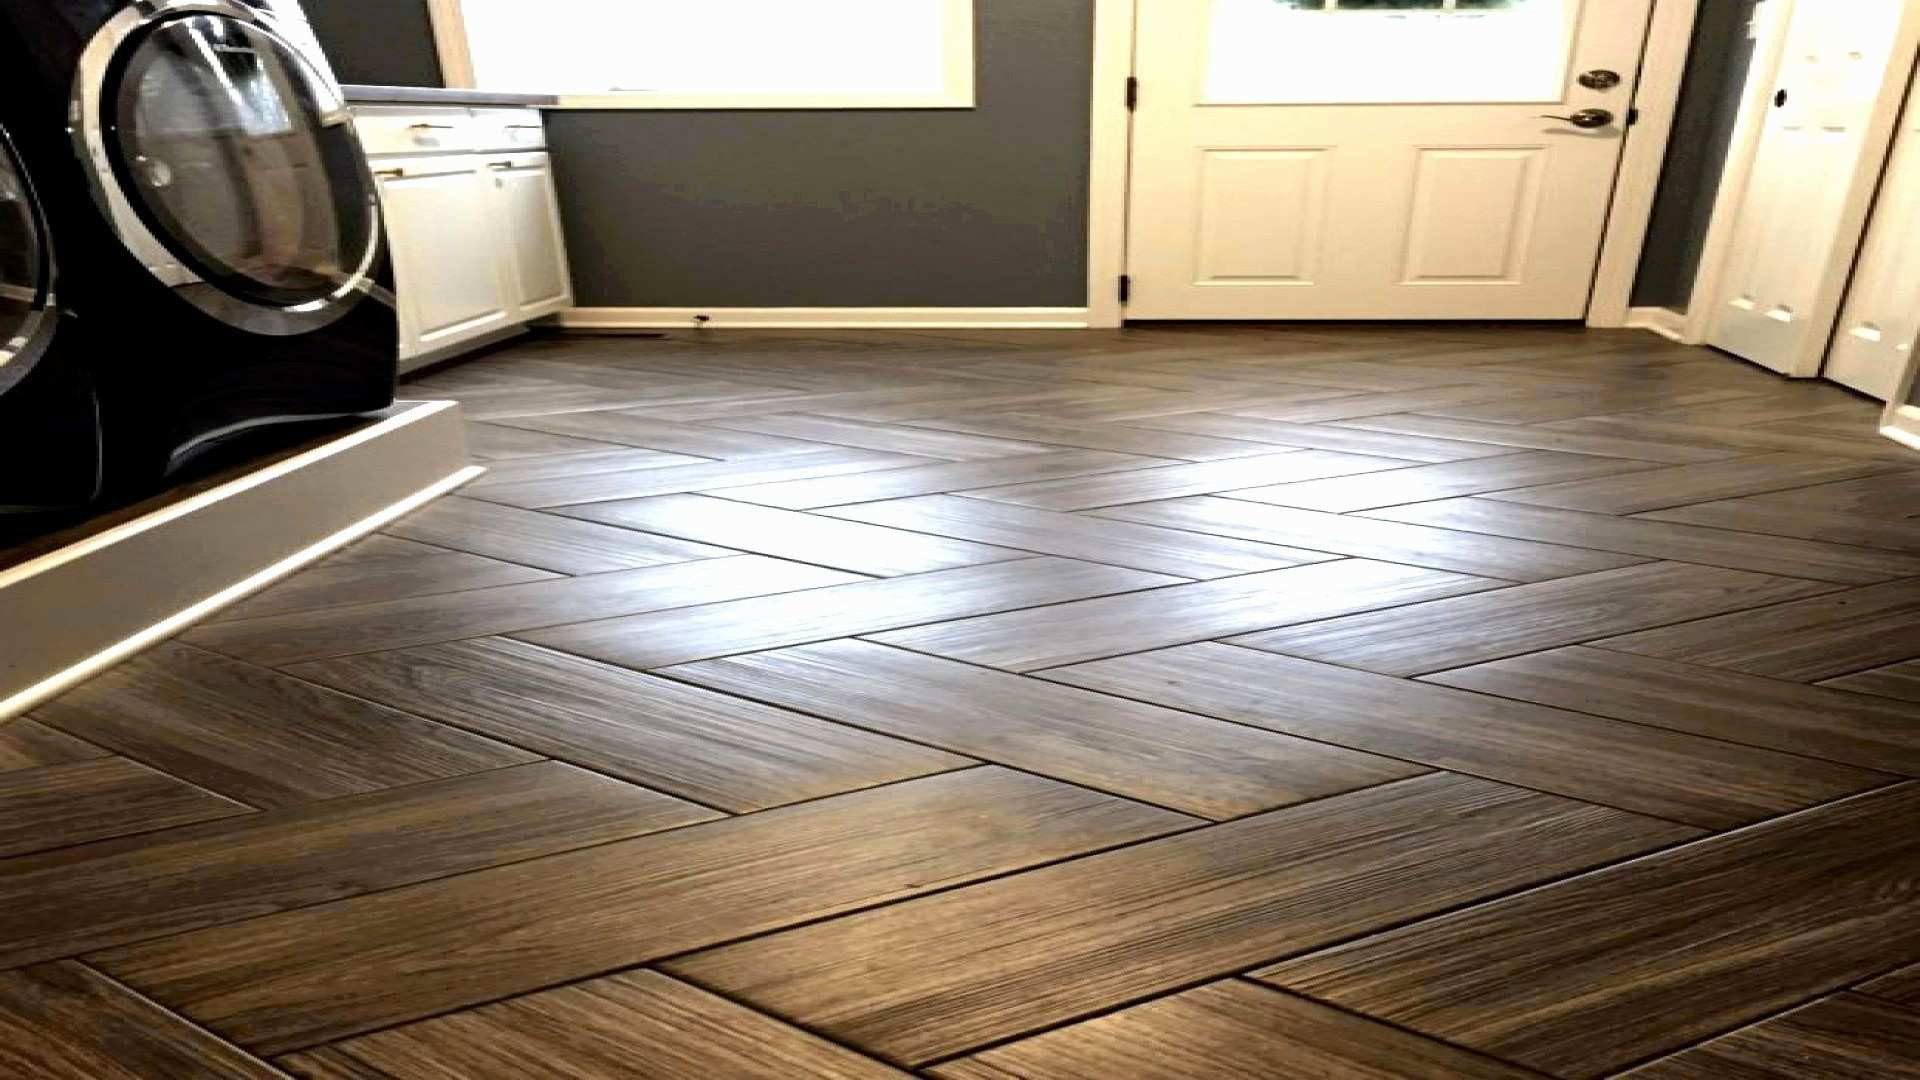 19 Awesome Costco Hardwood Flooring Cost 2024 free download costco hardwood flooring cost of laminate wood flooring cost elegant installing laminate flooring throughout gallery of laminate wood flooring cost